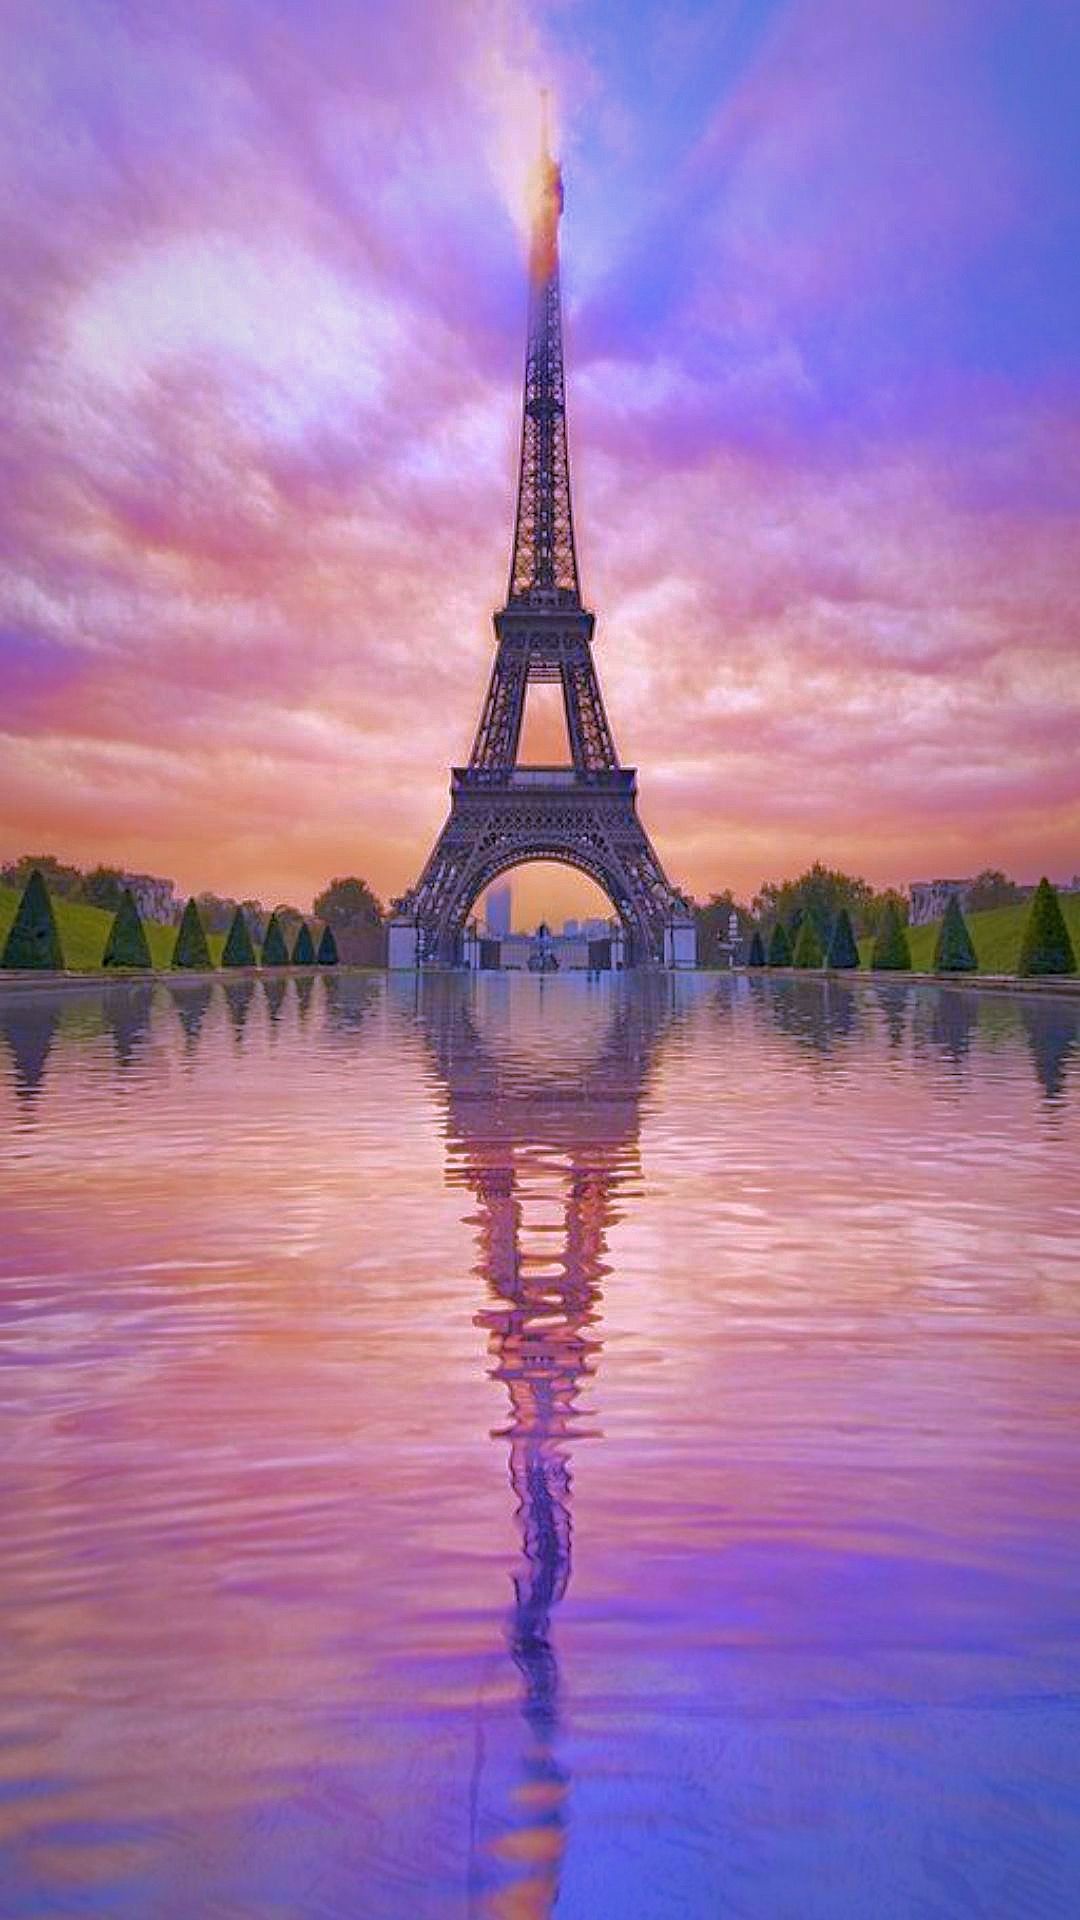 Aesthetic image of the Eiffel Tower in Paris with a purple and pink sunset. - Eiffel Tower, river